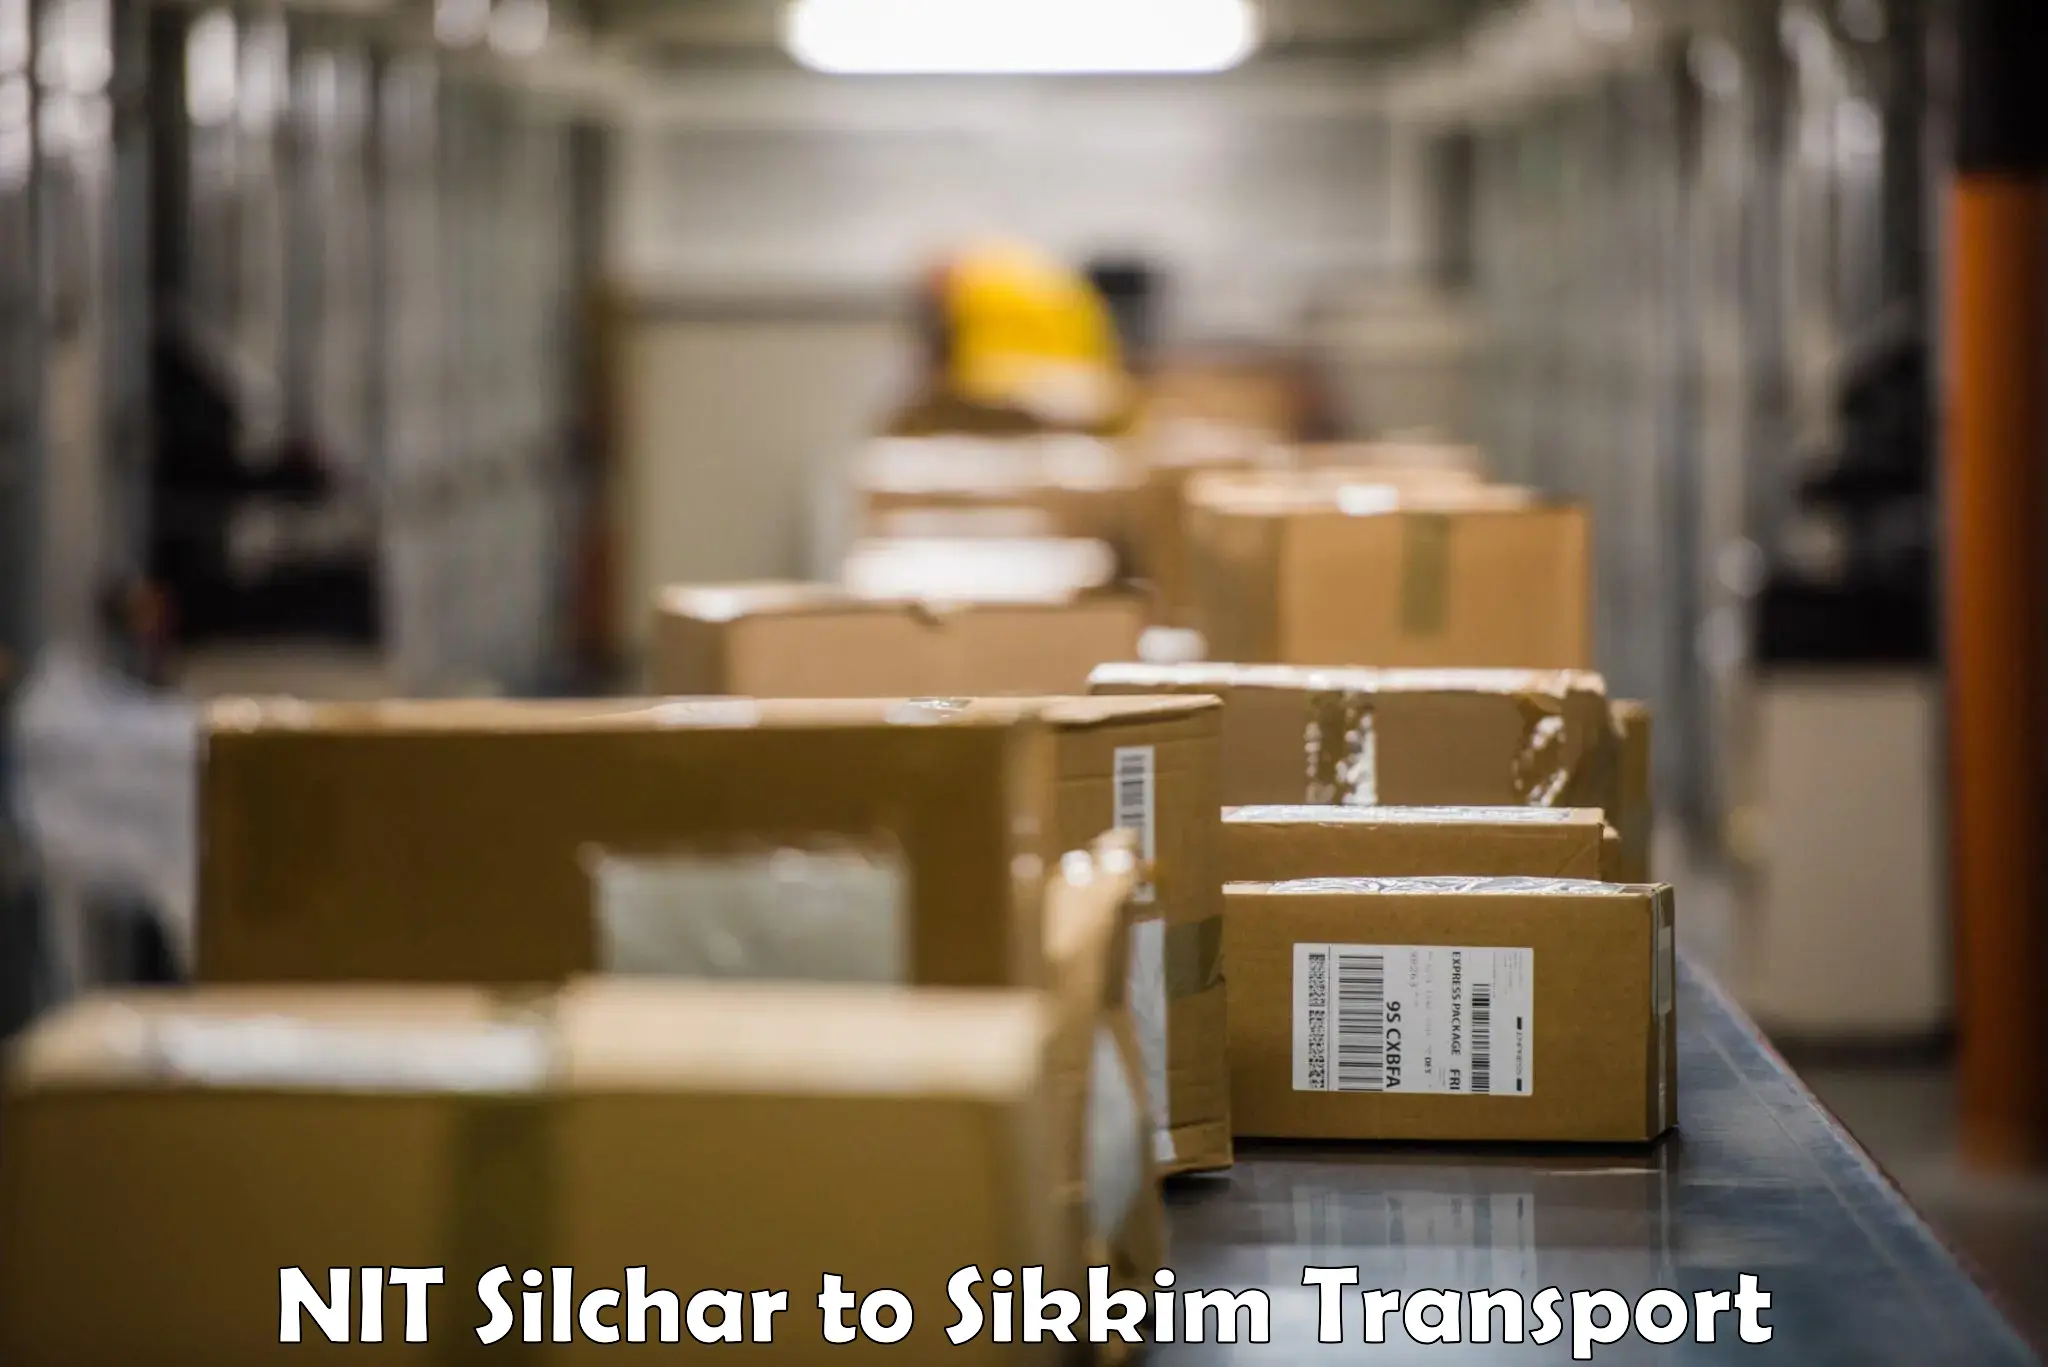 Parcel transport services NIT Silchar to Rongli